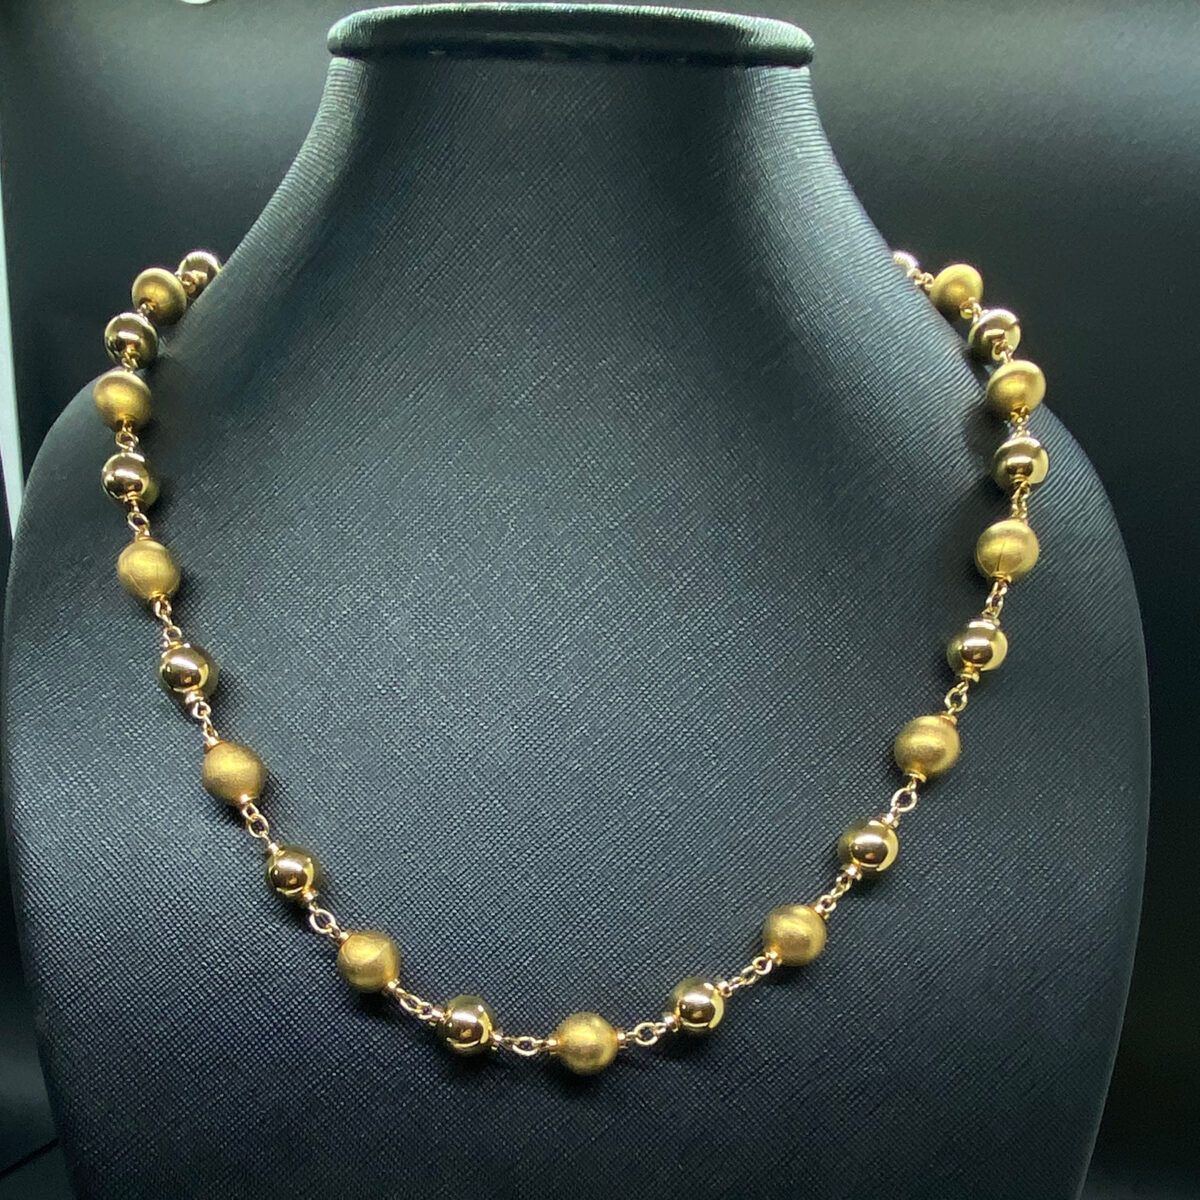 Gold Tone Smooth and Texture Bead Collar Necklace